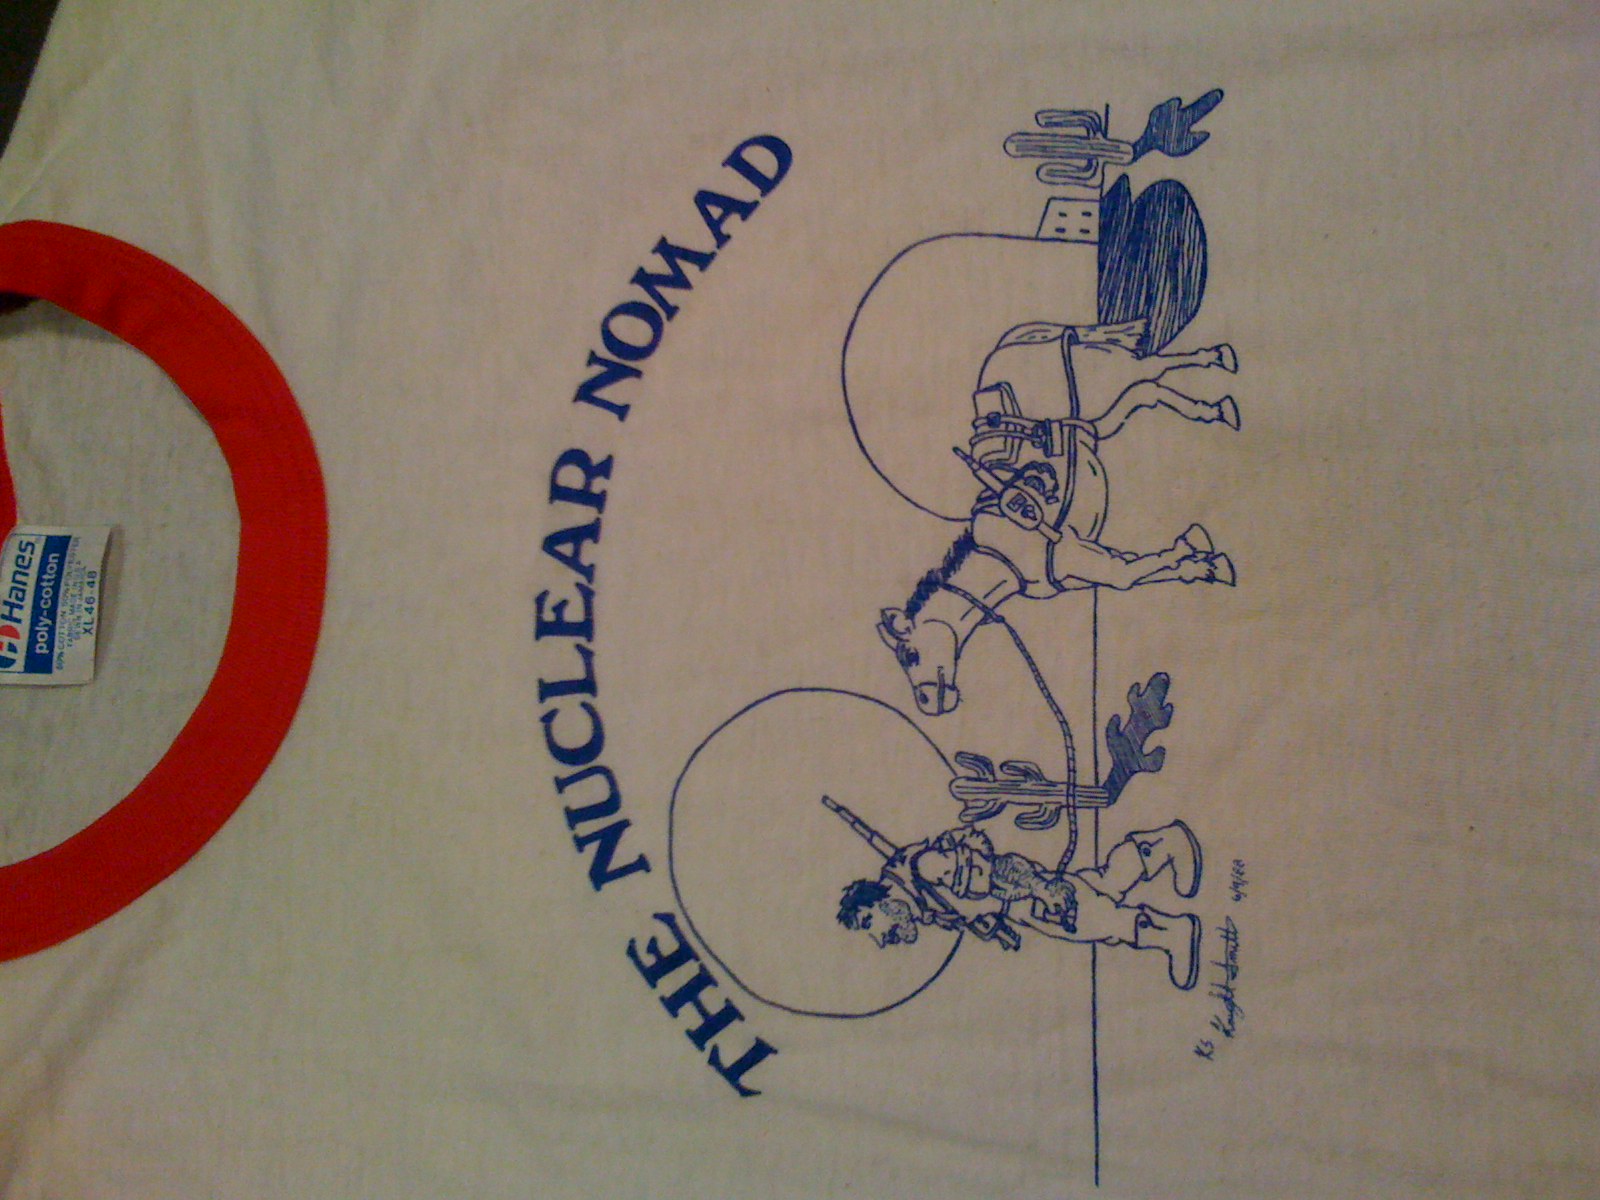 Nuclear Nomad
My wife Frances did this in 84 somewhere on the East coast.

